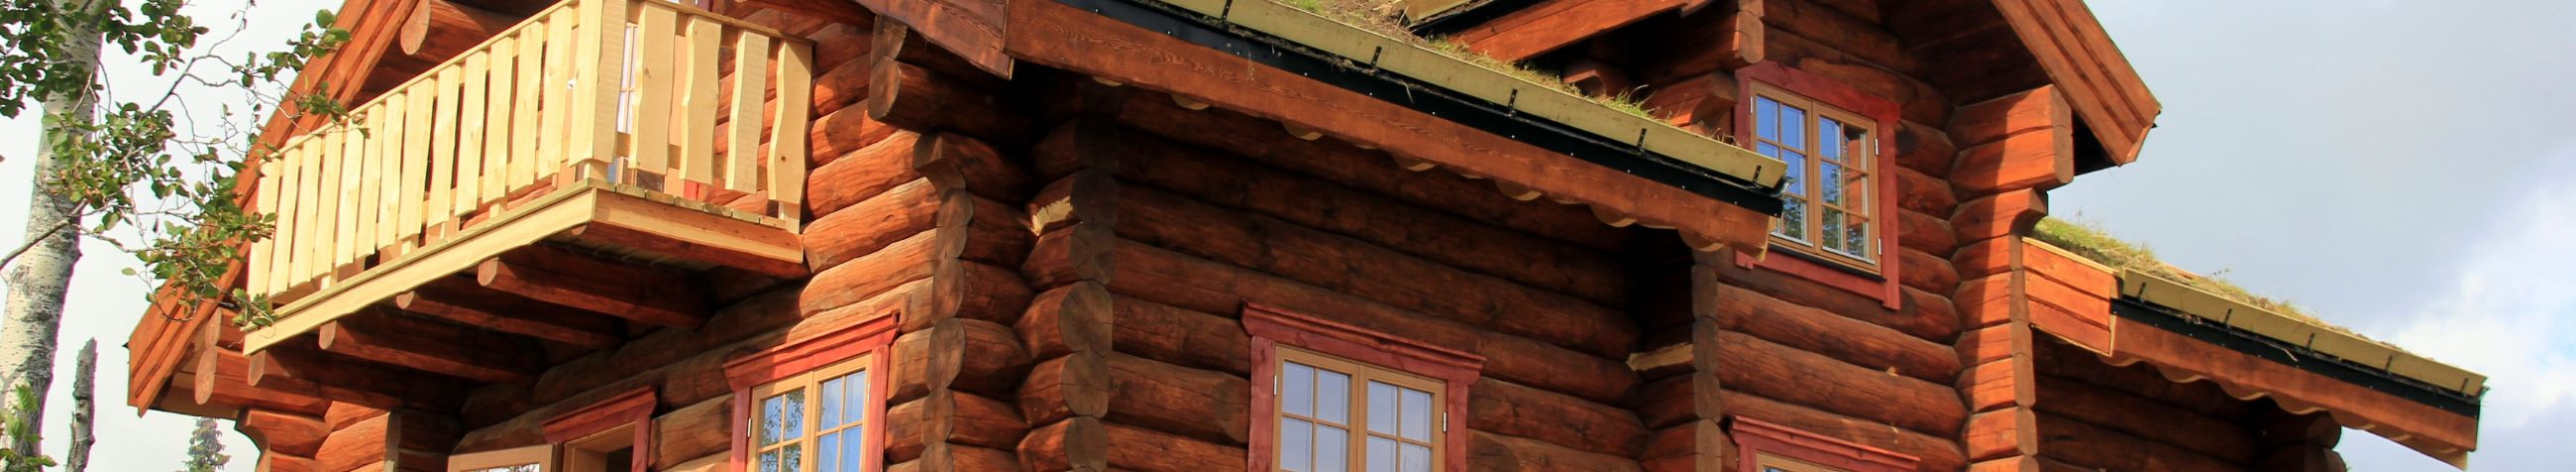 saunas and steam rooms, lifting and transport of log houses, design and planning of log houses, renovation and restoration of log houses, the knee land, construction work and installation of logs, log houses with a living area, summer homes and cottages, Guesthouses, country houses